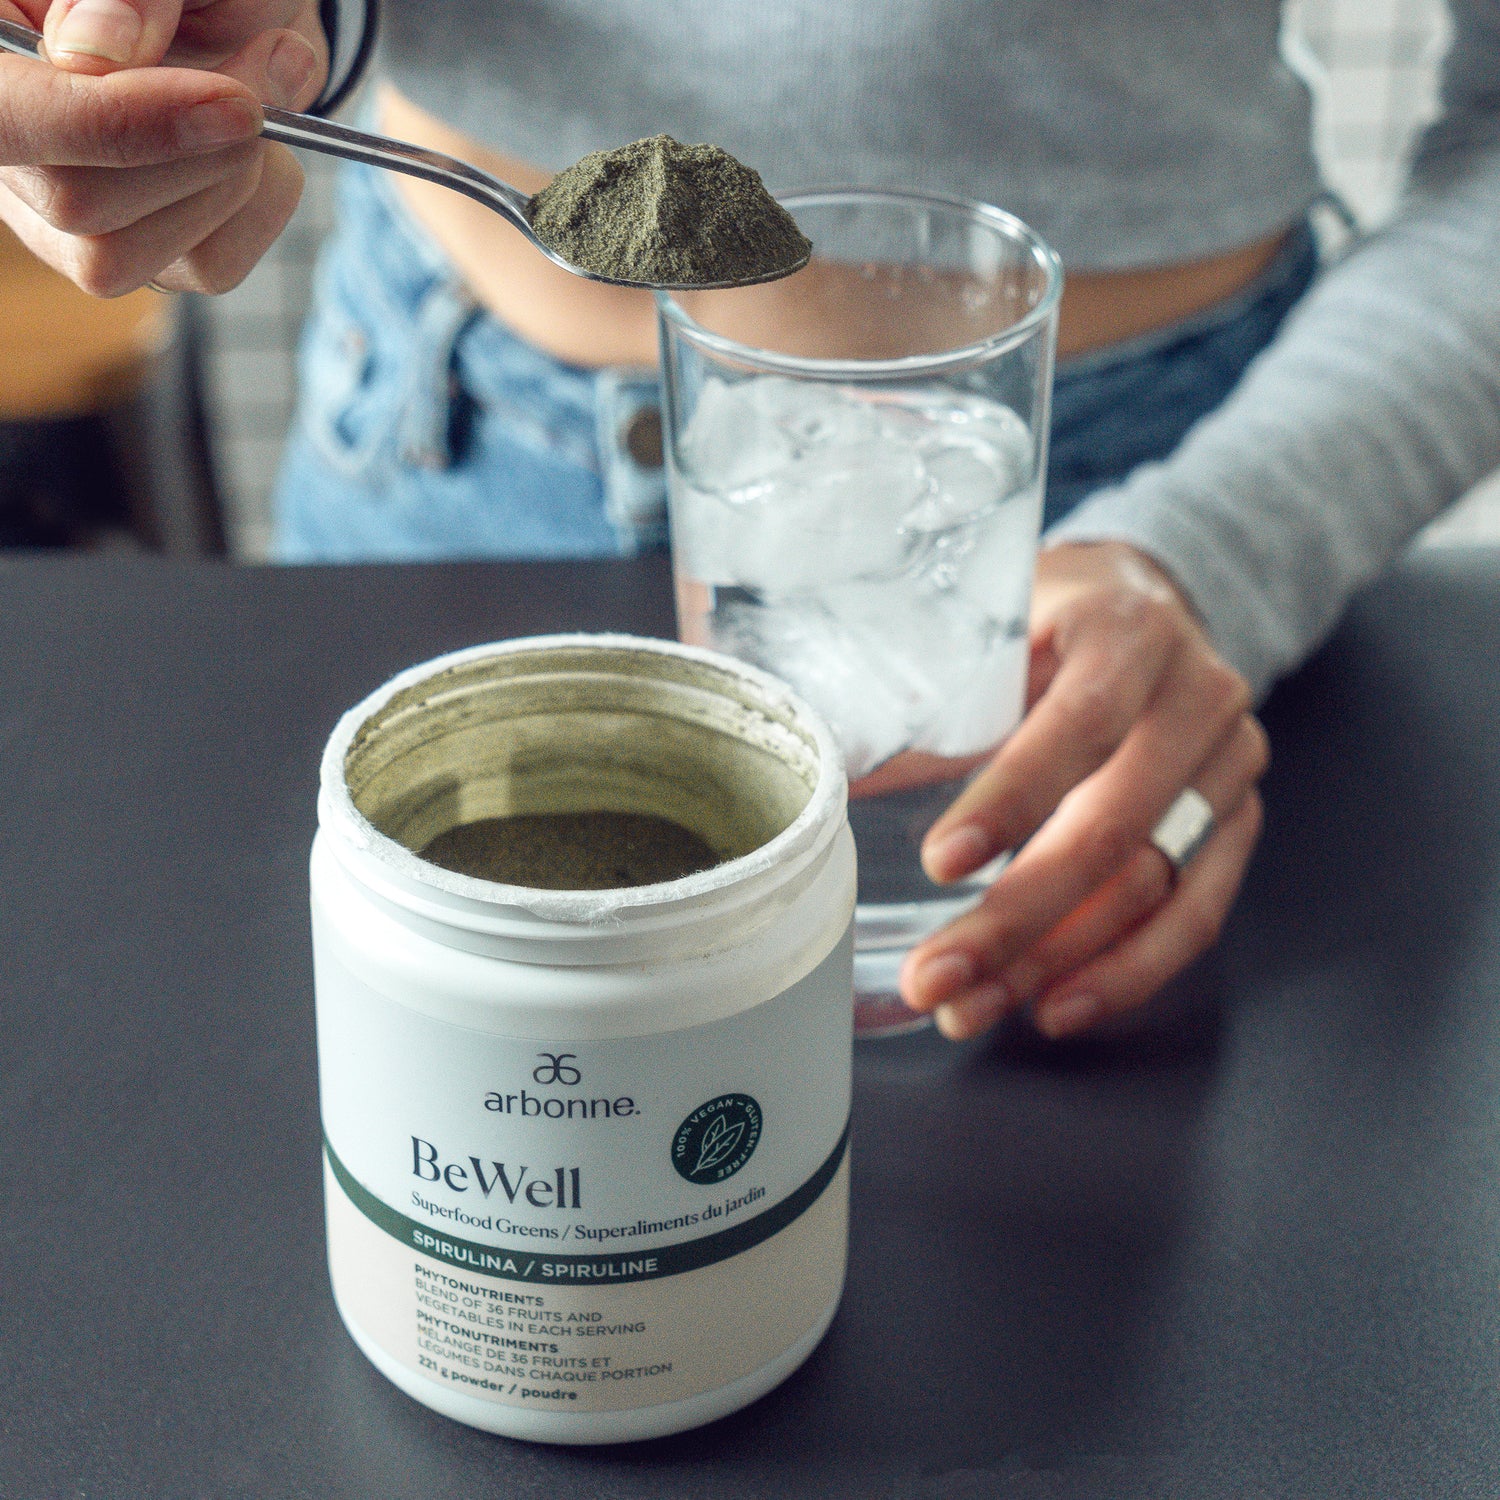 Person scooping green BeWell superfood powder from an Arbonne container, with a glass of ice water in the background.